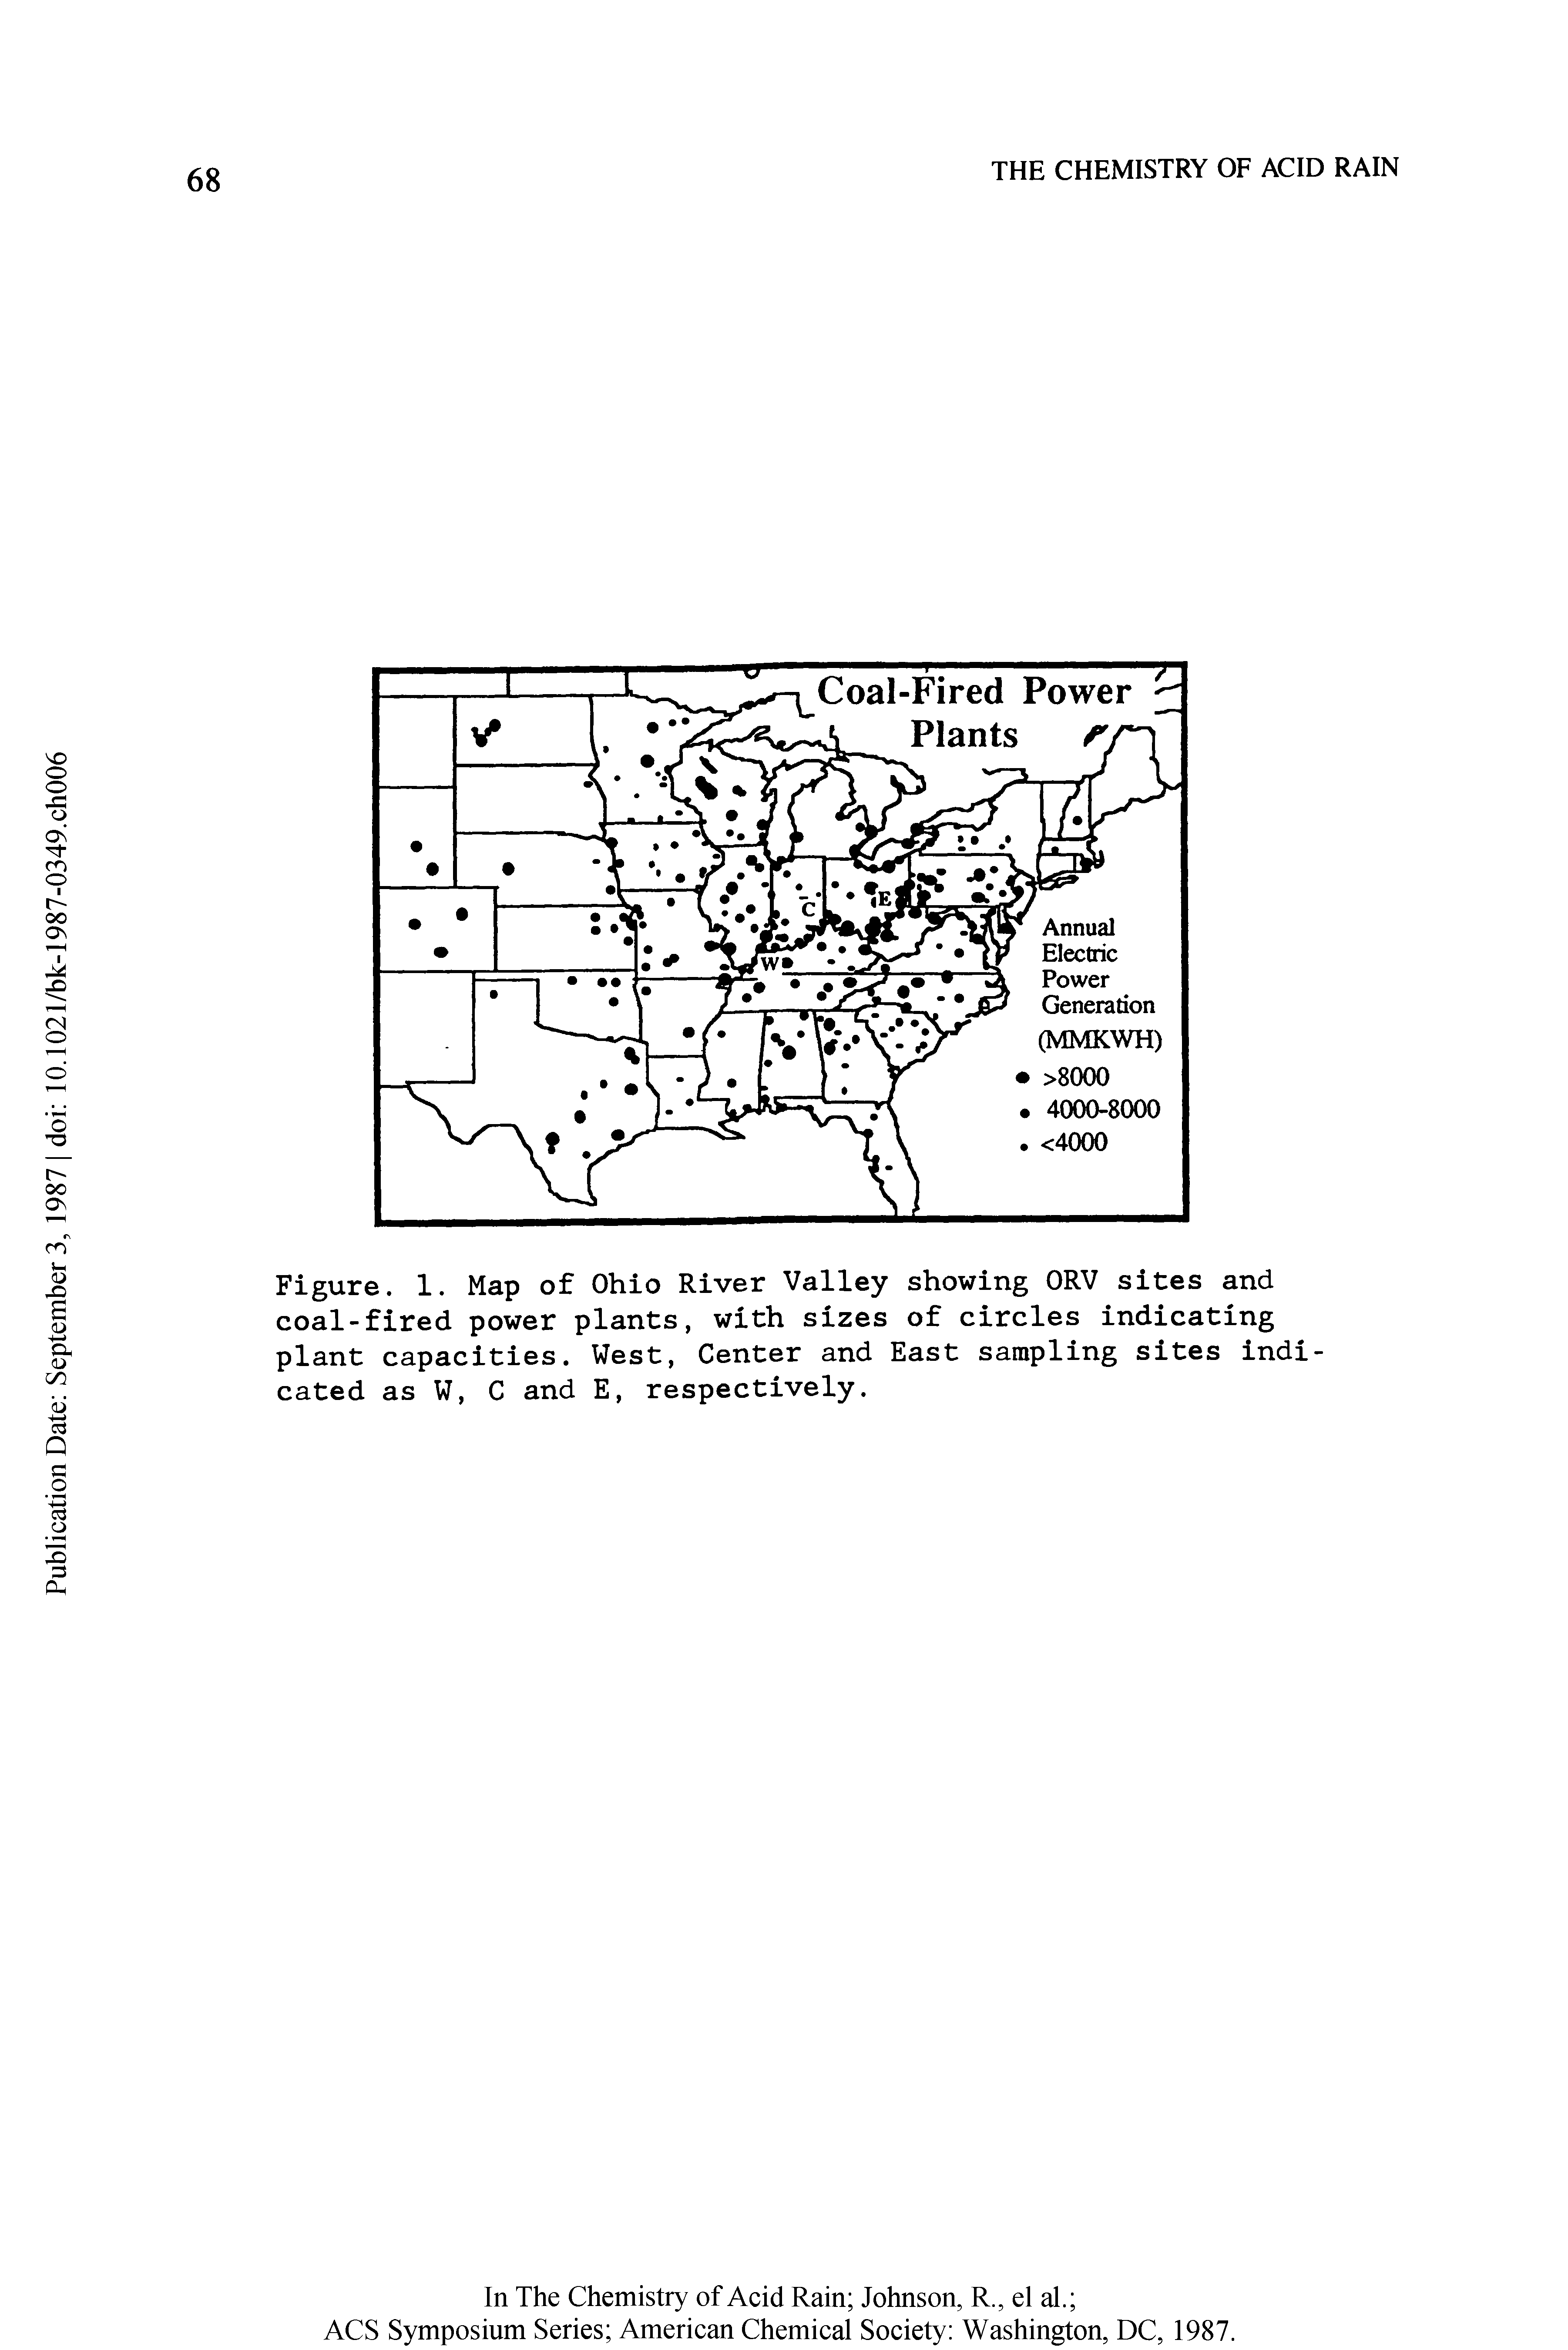 Figure. 1. Map of Ohio River Valley showing ORV sites and coal-fired power plants, with sizes of circles indicating plant capacities. West, Center and East sampling sites indicated as W, C and E, respectively.